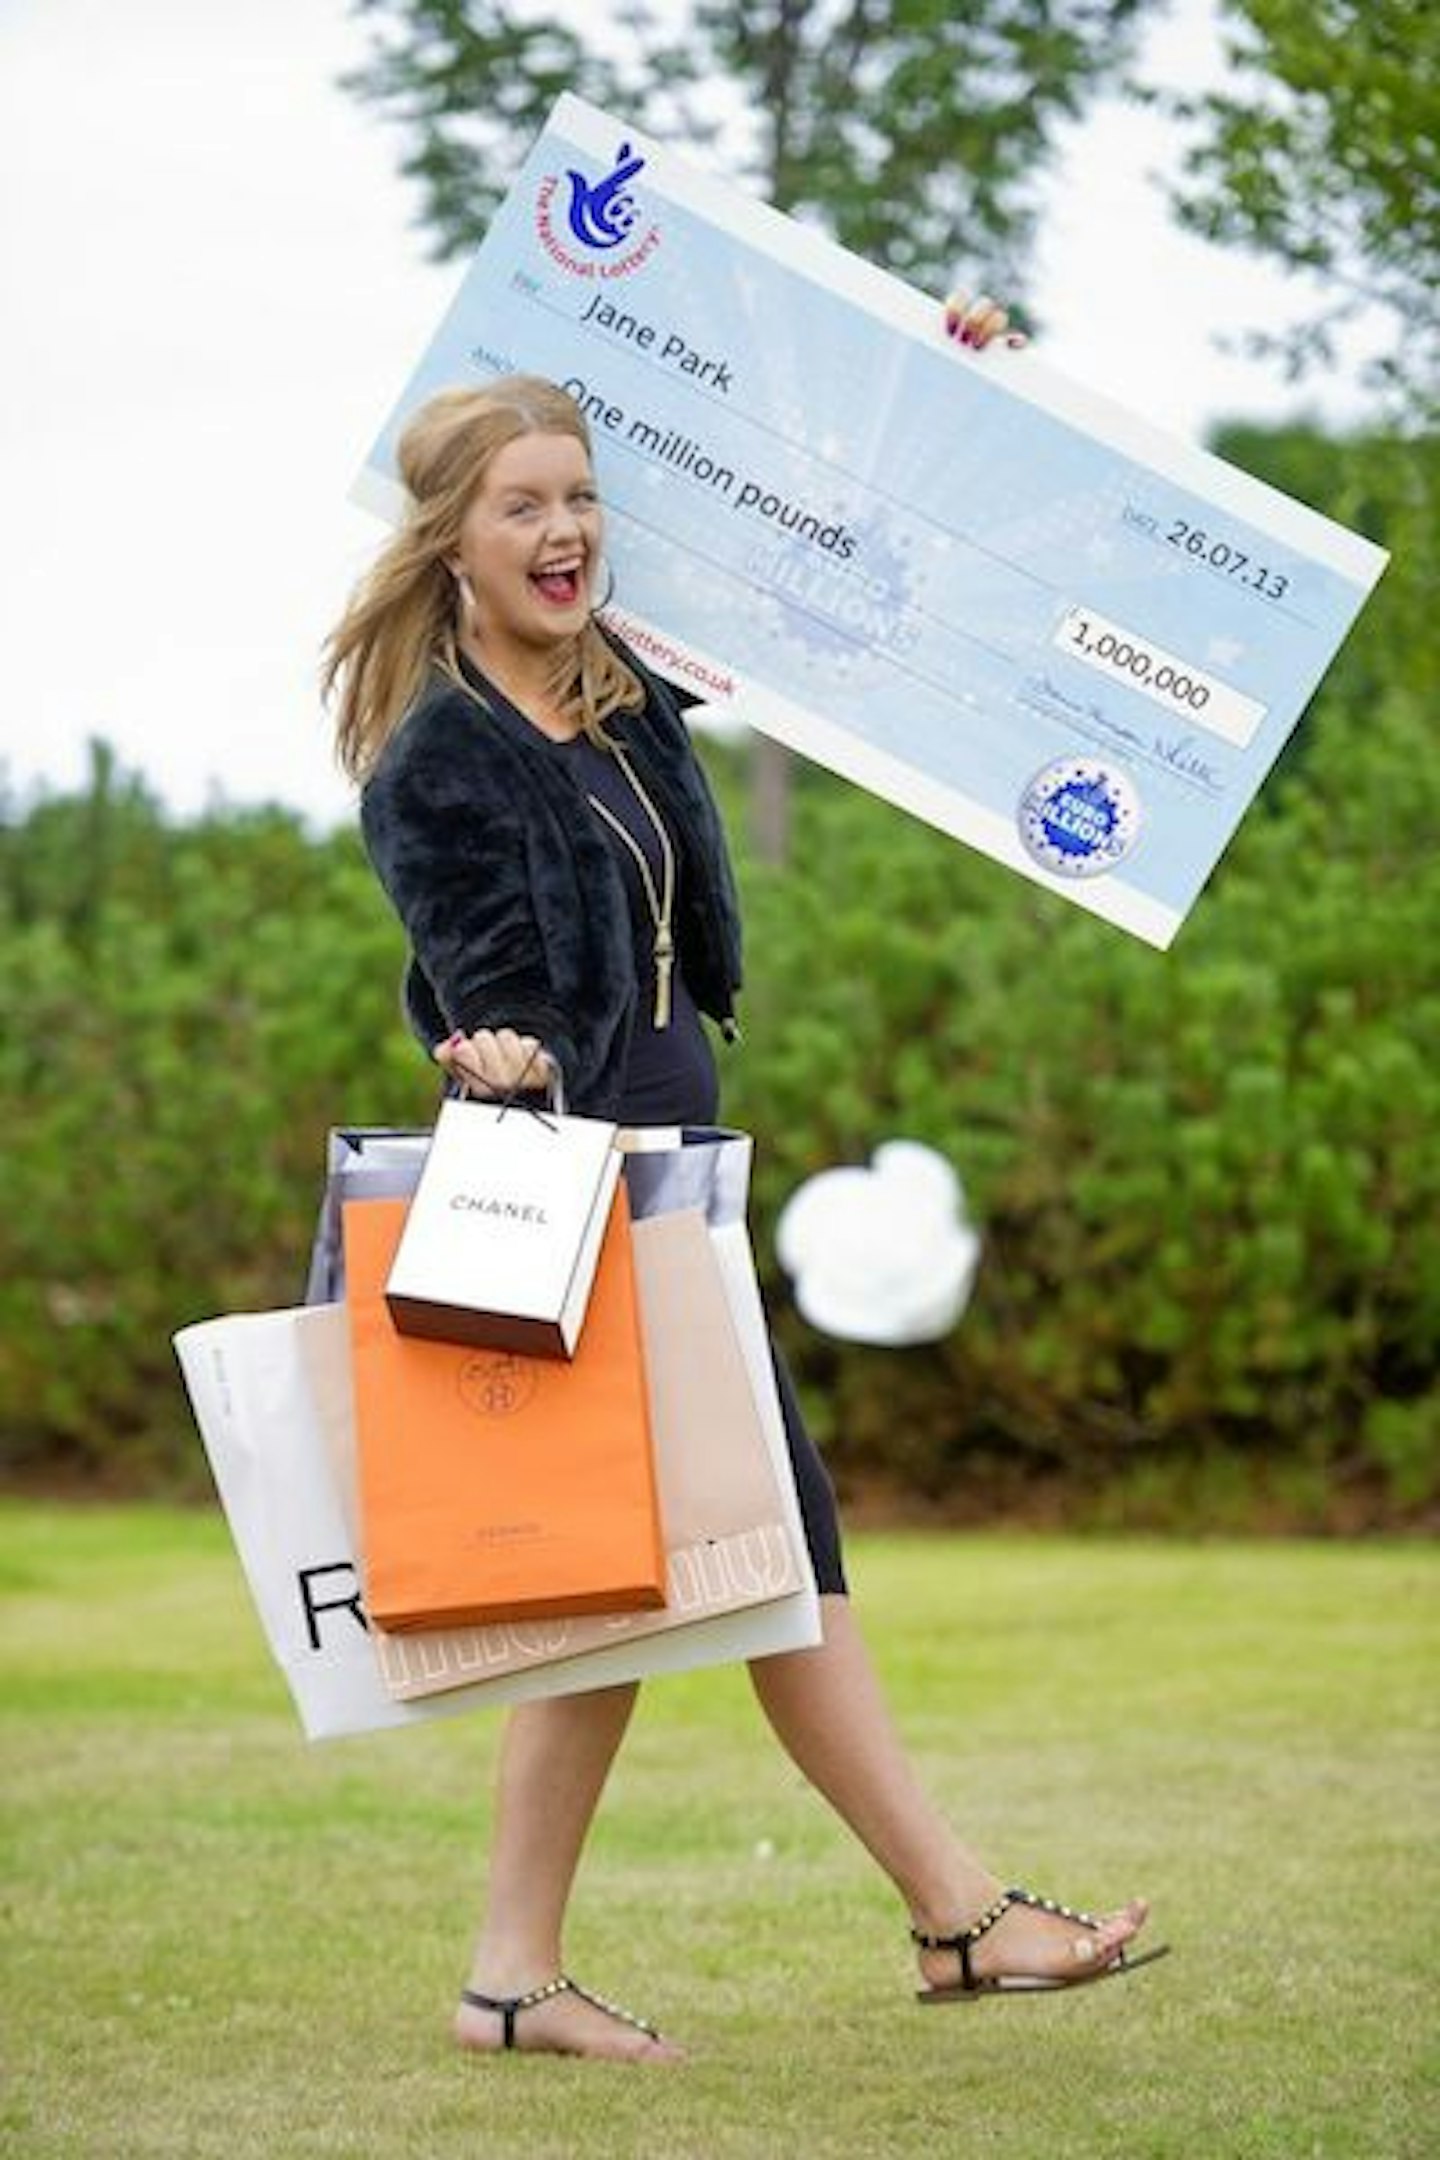 Jane Parks, the youngest ever Euromillions winner